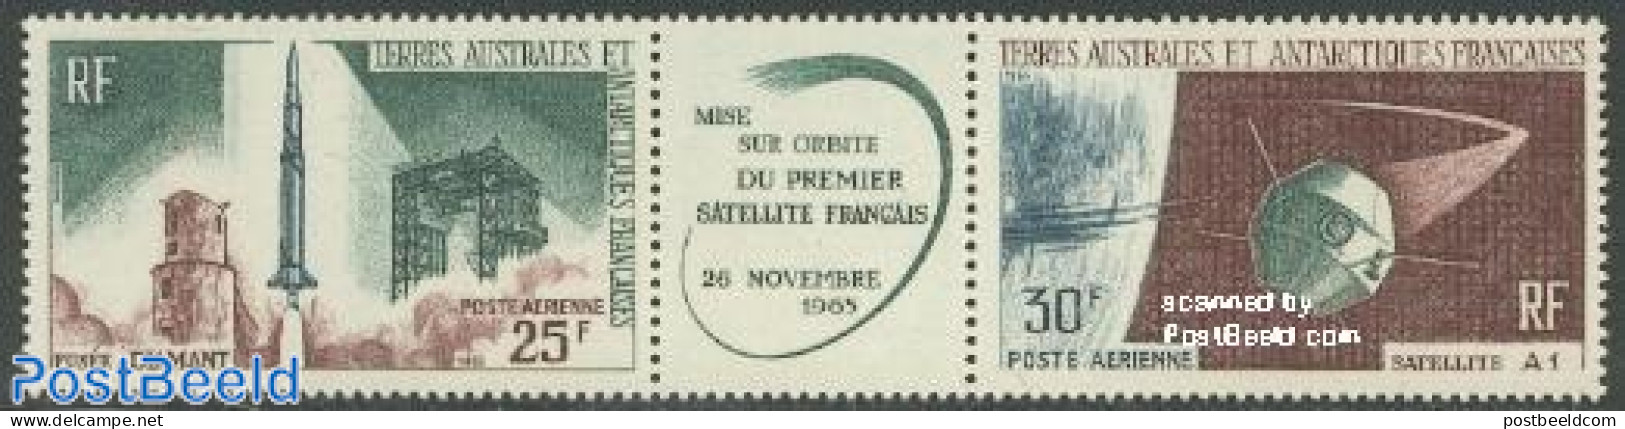 French Antarctic Territory 1966 Satellites 2v+tab [:T:], Mint NH, Transport - Various - Space Exploration - Joint Issues - Ongebruikt